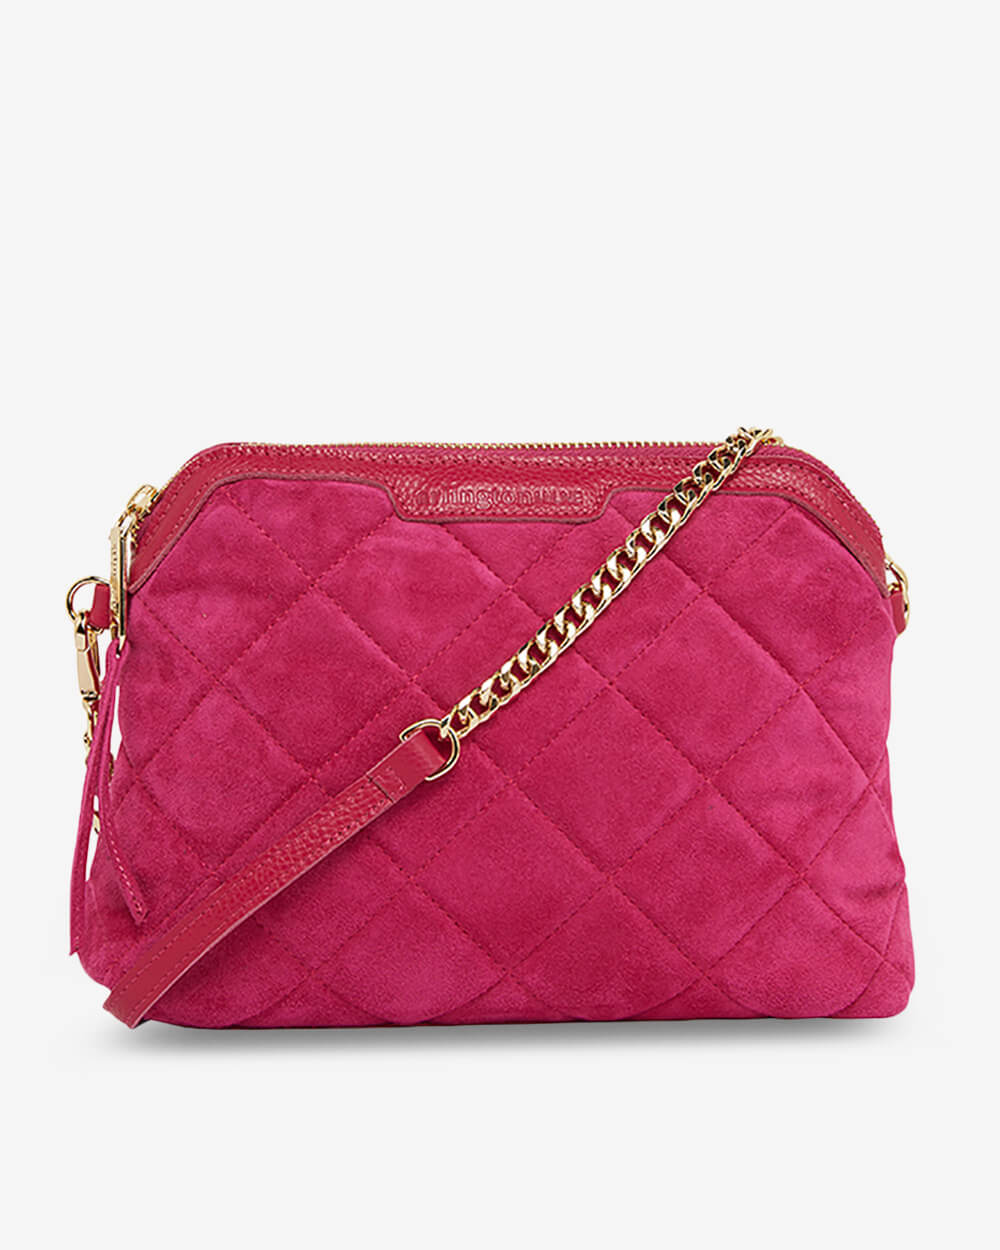 Abigail - Hot Pink Suede